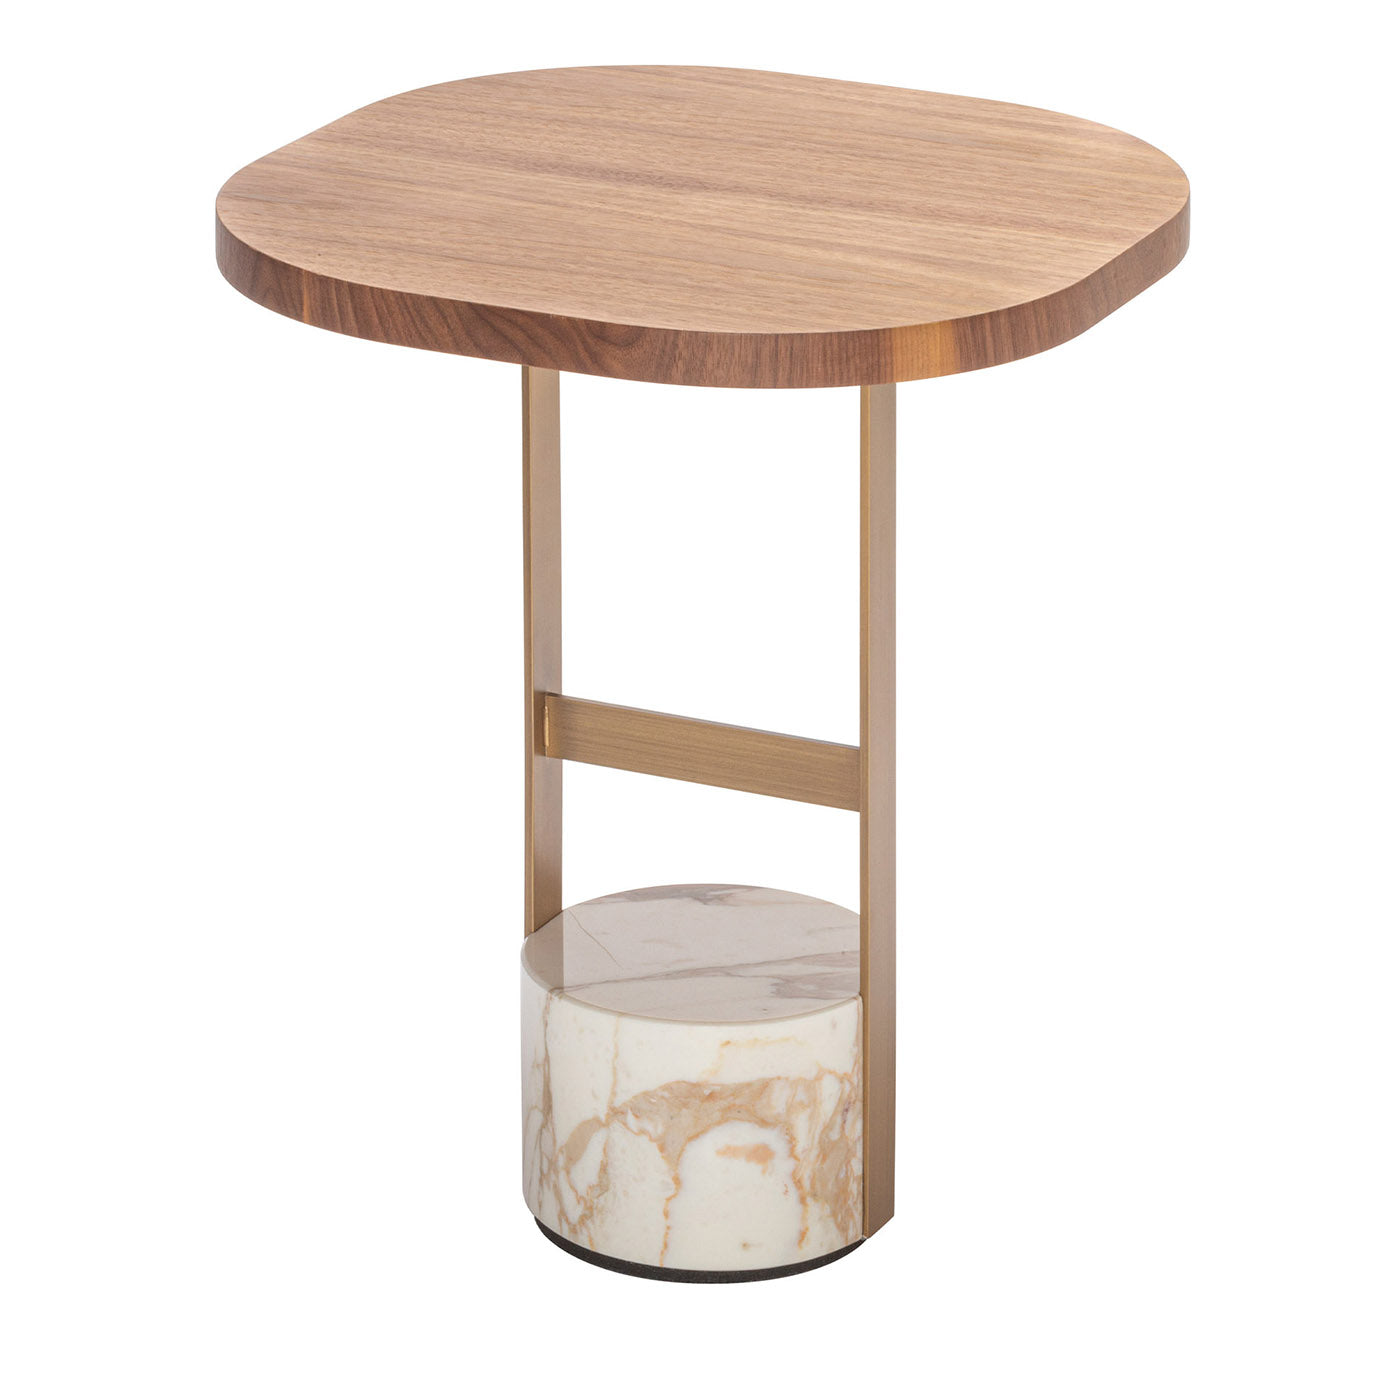 Dama Small Calacatta Marble And Walnut Wood Side Table - Main view